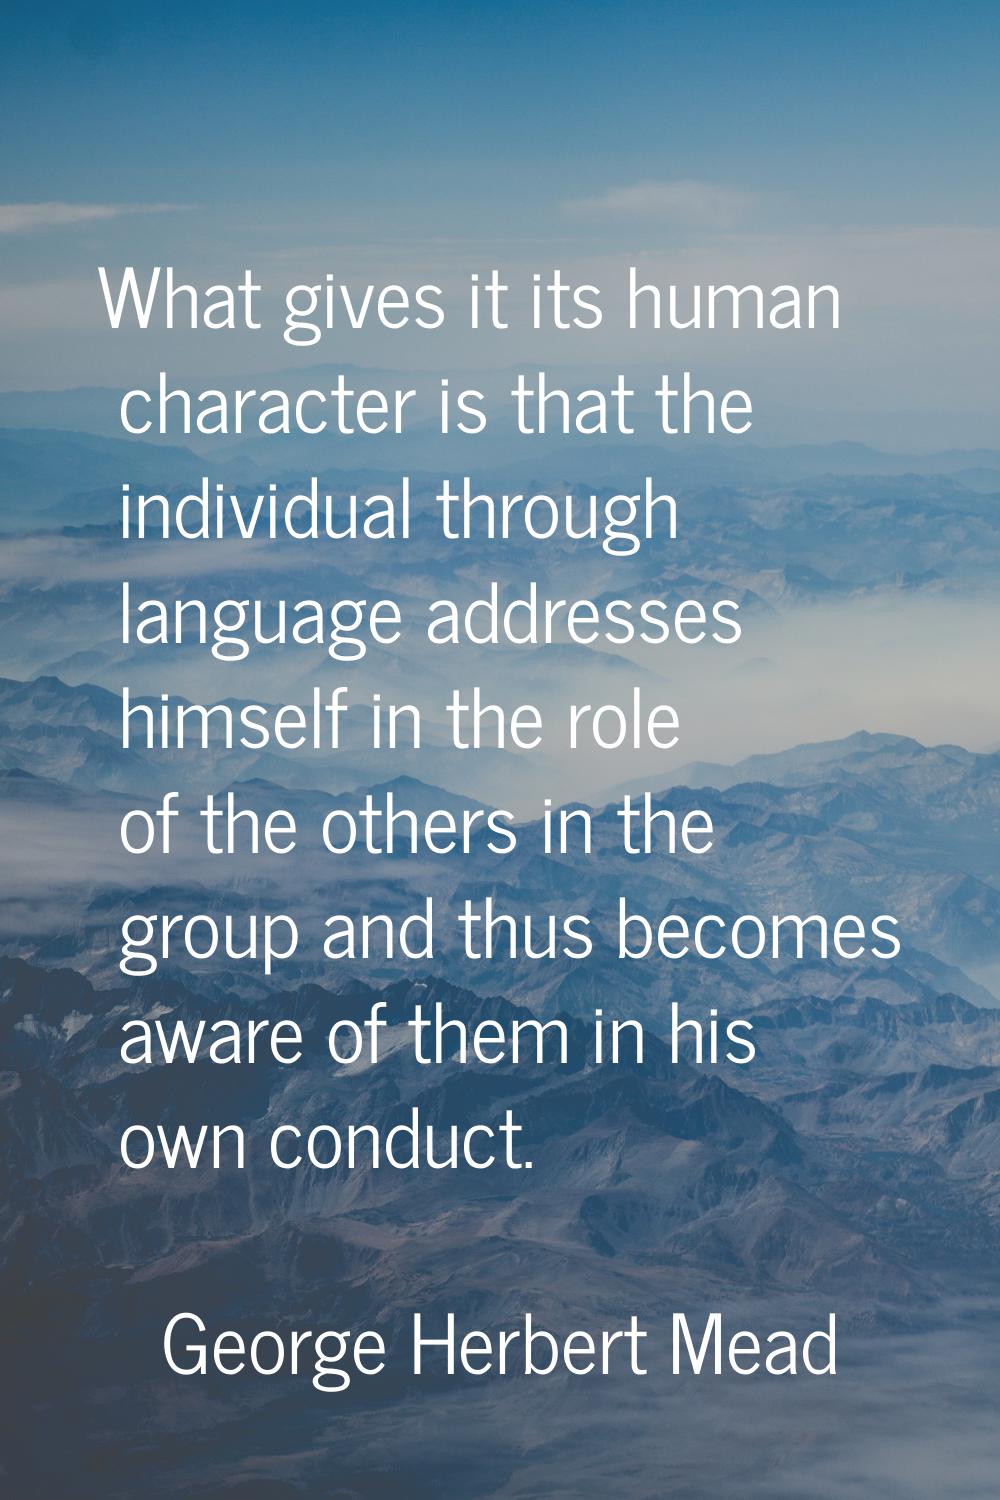 What gives it its human character is that the individual through language addresses himself in the 